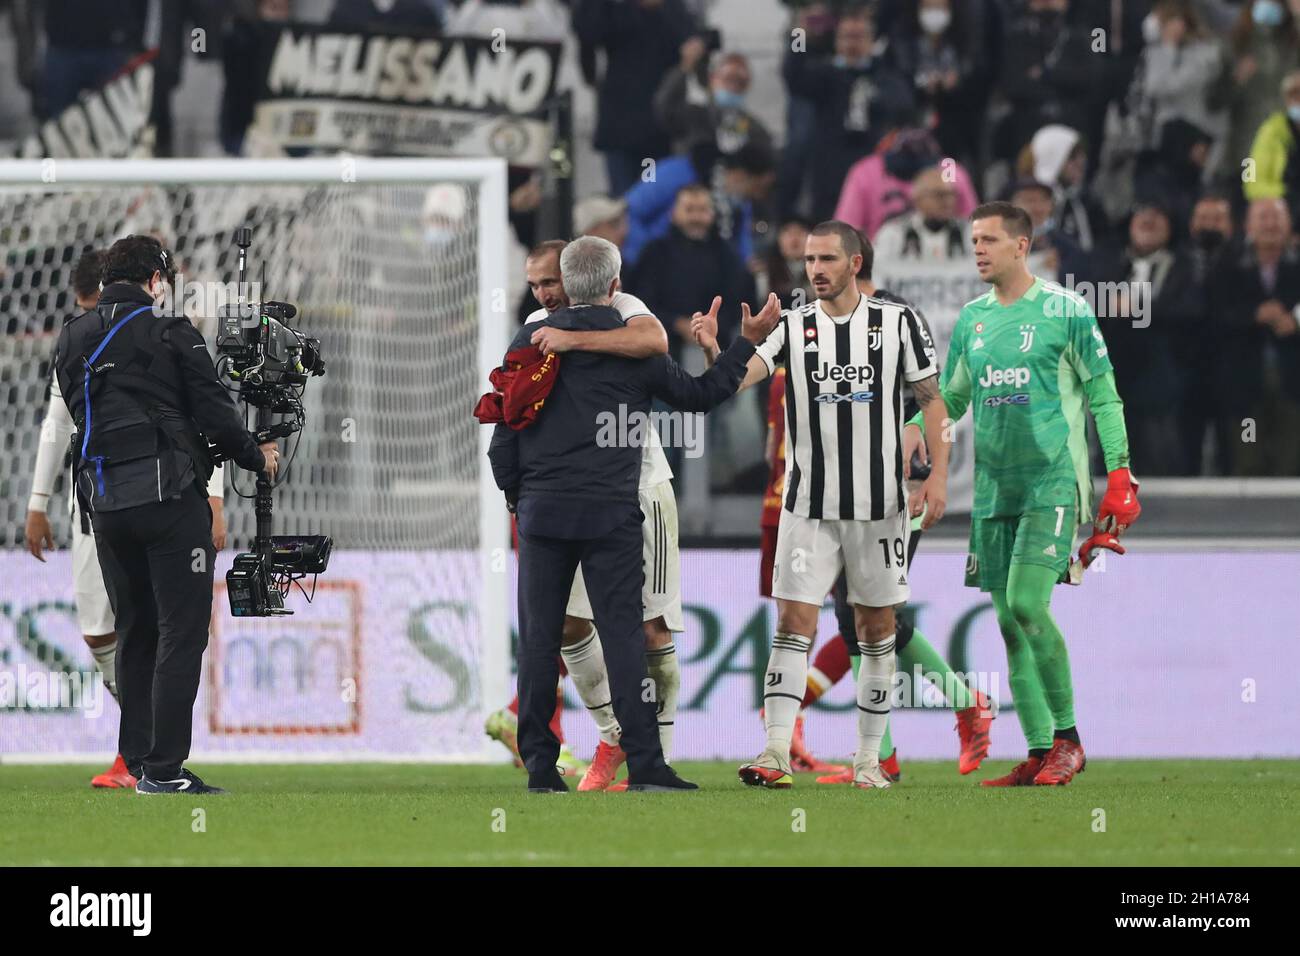 Turin, Italy. 17th Oct, 2021. Wojciech Szczesny of Juventus looks on as Jose Mourinho Head coach of AS Roma shakes hands with Leonardo Bonucci of Juventus as he is embraced by Giorgio Chiellini of Juventus following the final whistle of the Serie A match at Allianz Stadium, Turin. Picture credit should read: Jonathan Moscrop/Sportimage Credit: Sportimage/Alamy Live News Stock Photo